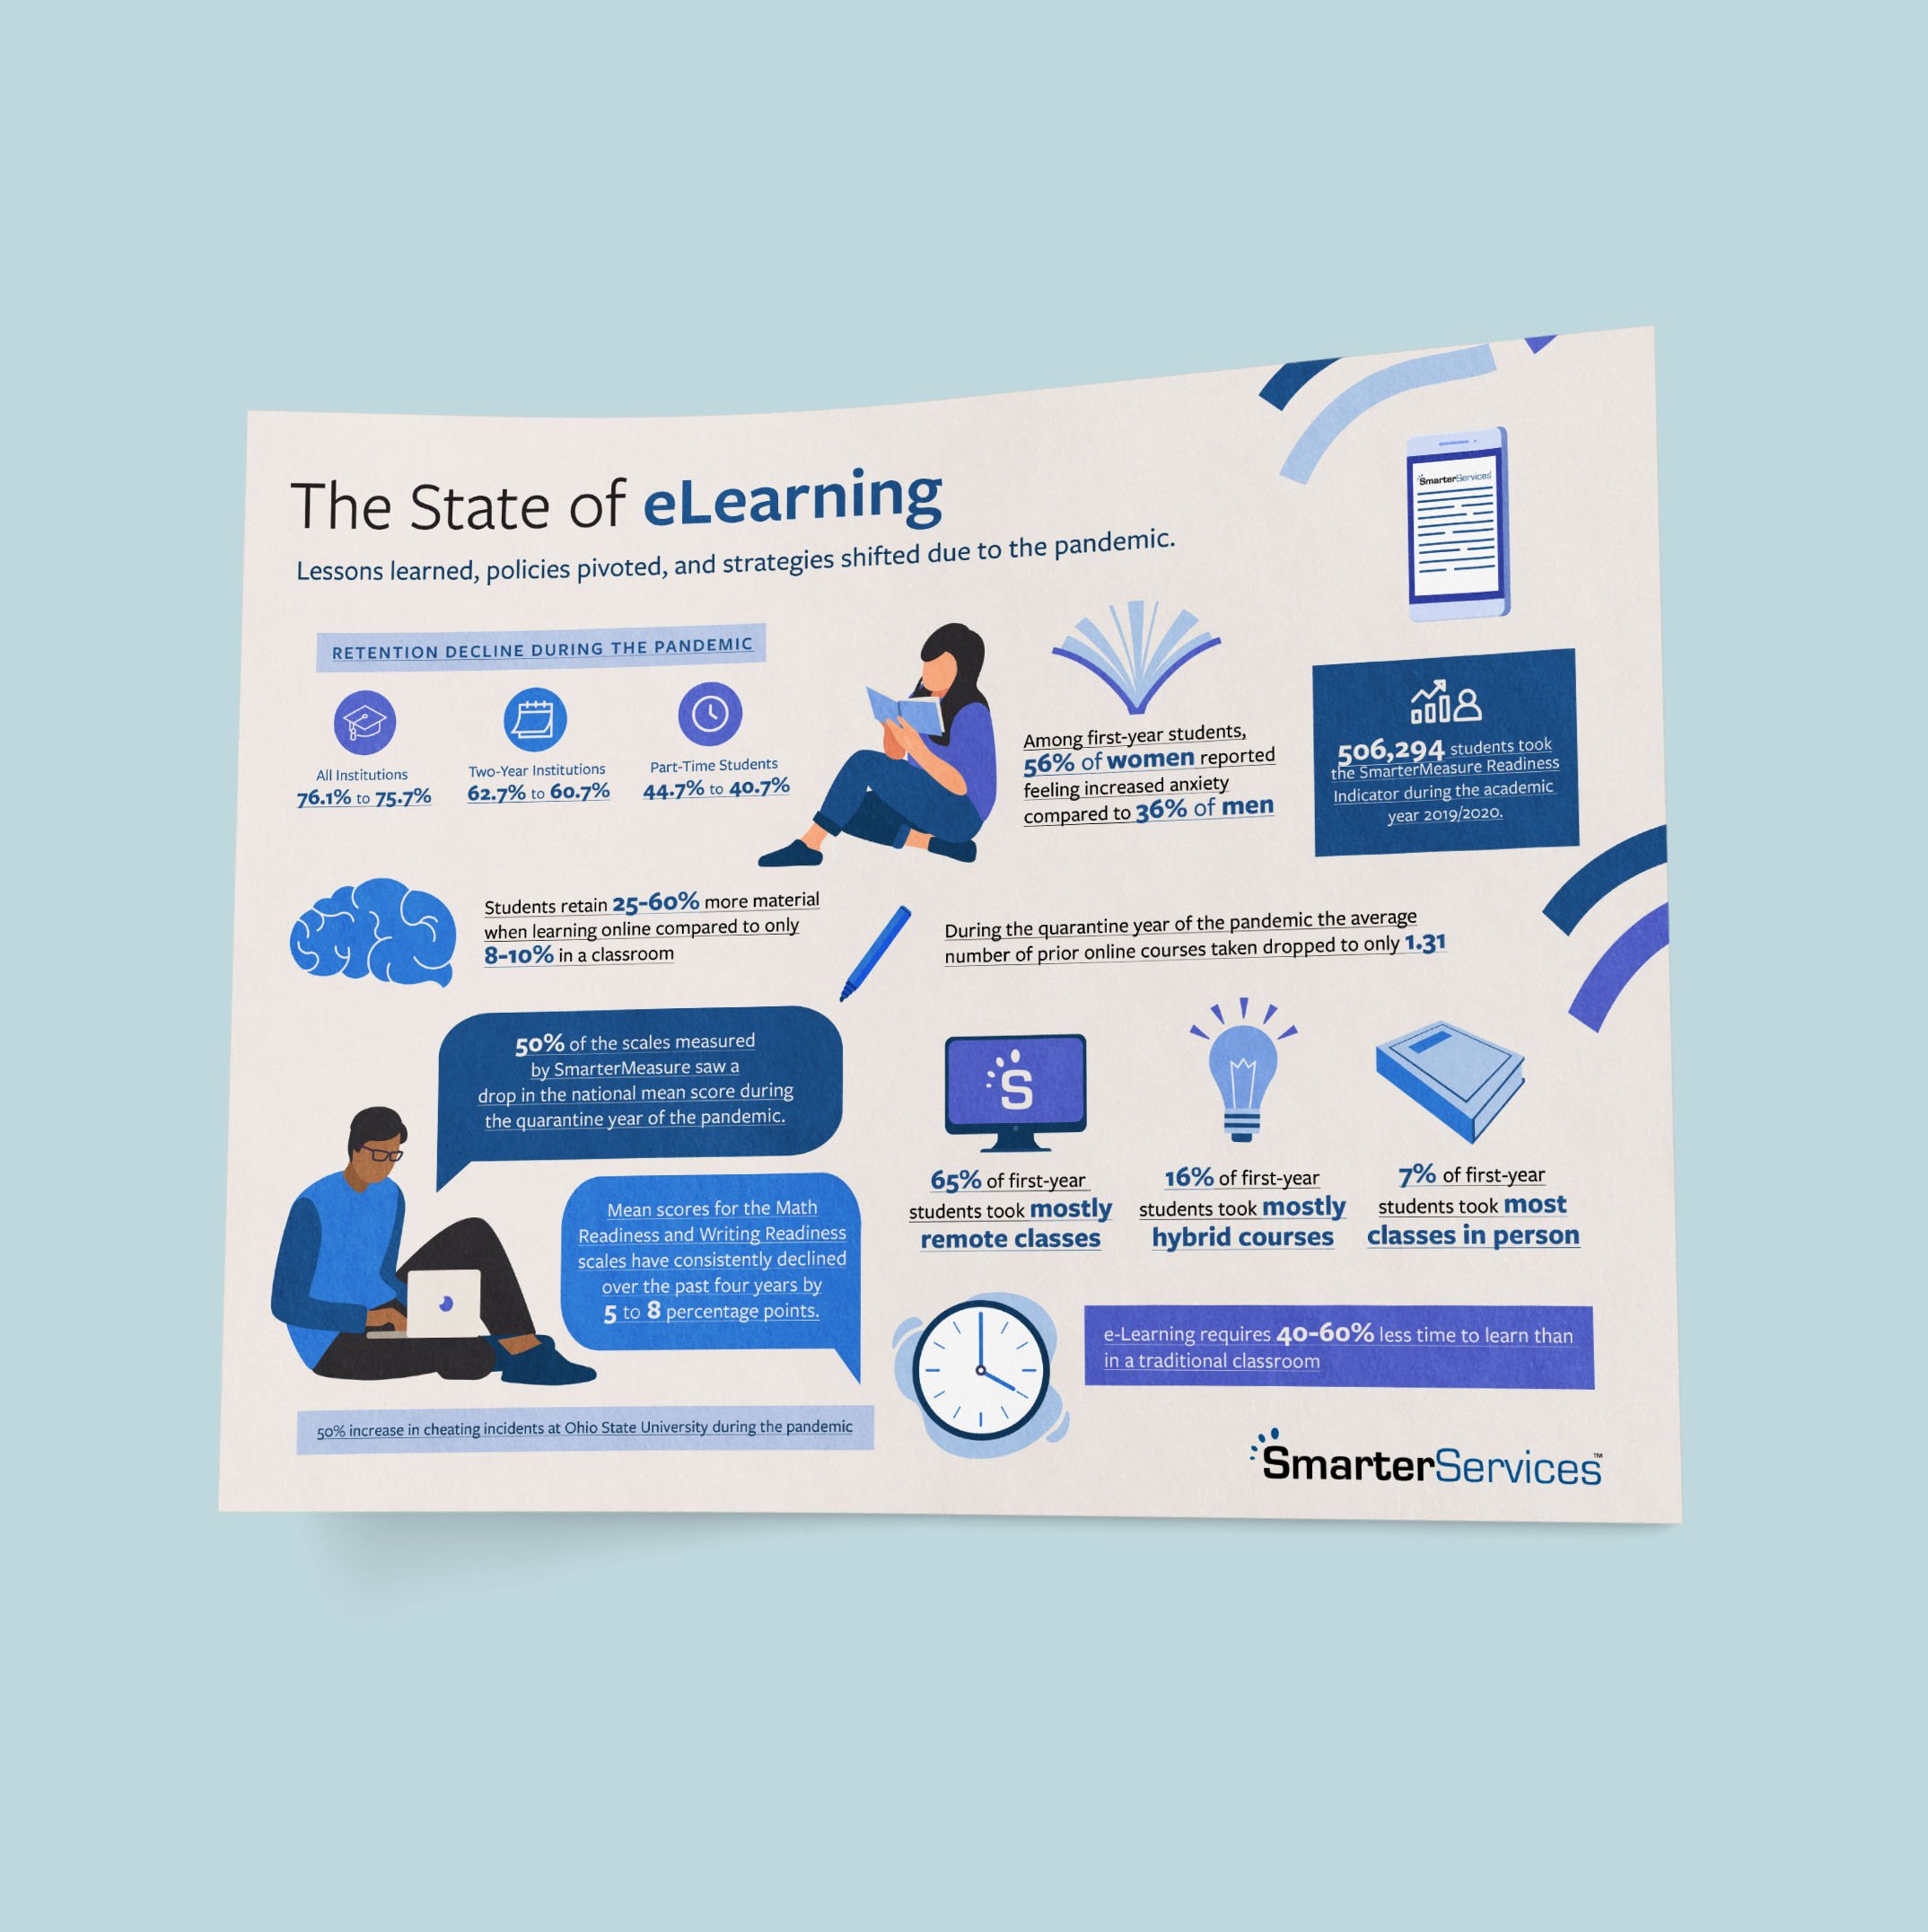 The State of eLearning